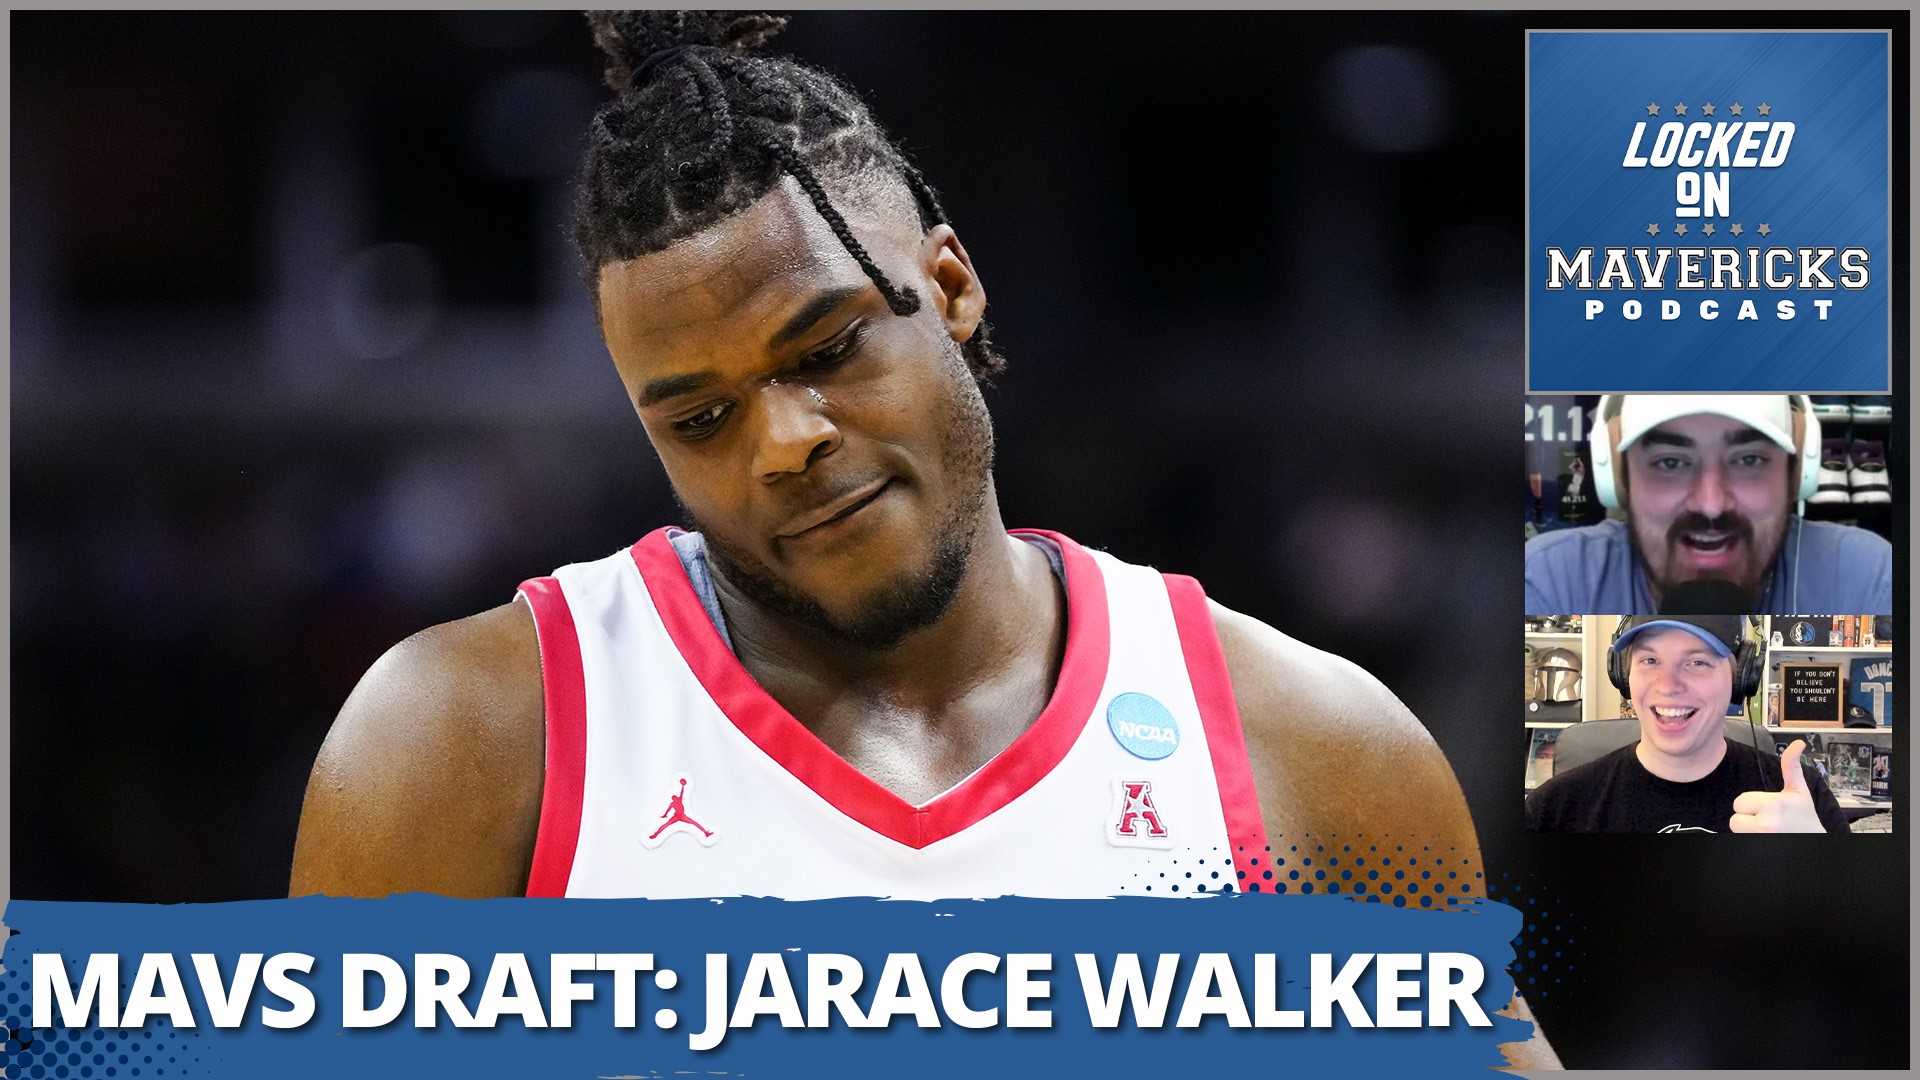 Nick Angstadt & Isaac Harris discuss Jarace Walker and his fit on the Dallas Mavericks if the Mavs were to select him in the 2023 NBA Draft.